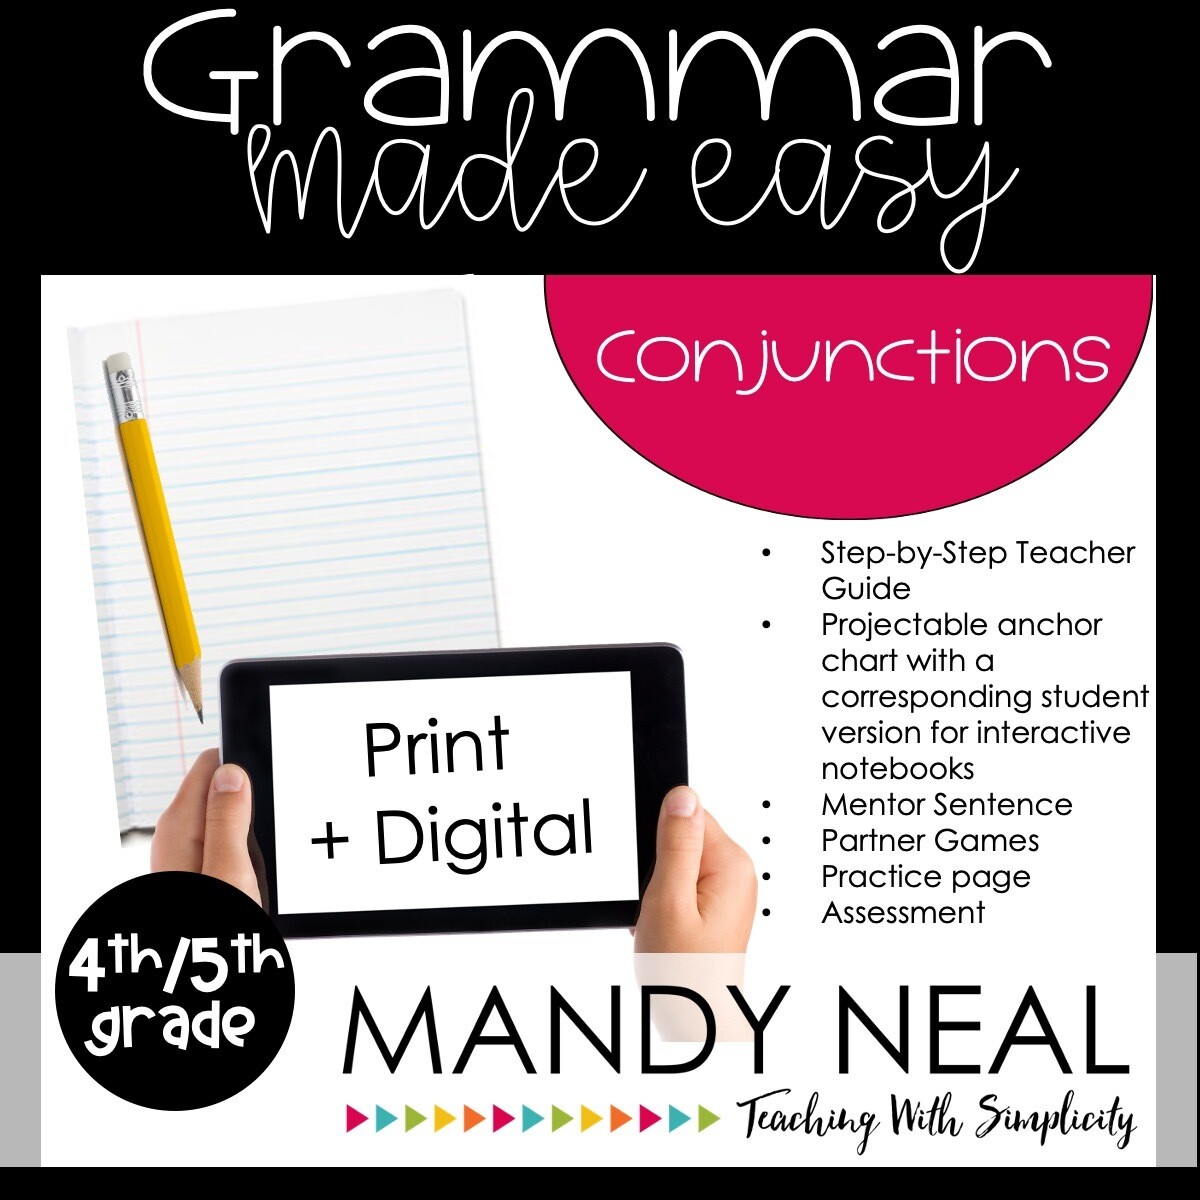 Print + Digital Fourth and Fifth Grade Grammar Activities (Conjunctions)